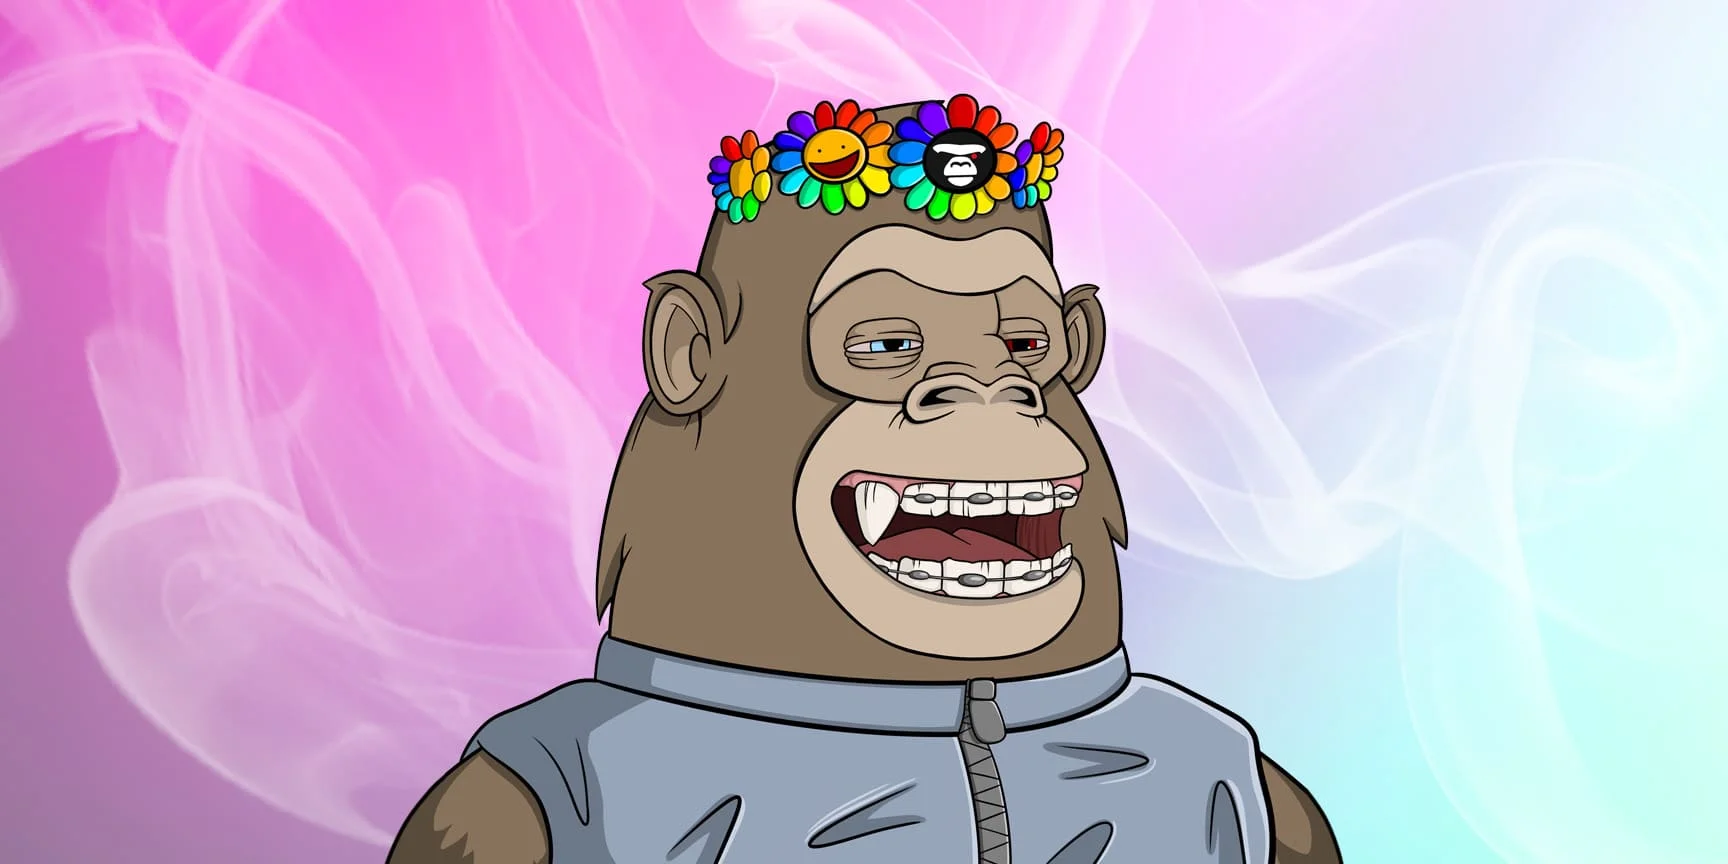 APE sits in gray jacket and rainbow wreath and thinks about health benefits of cannabis